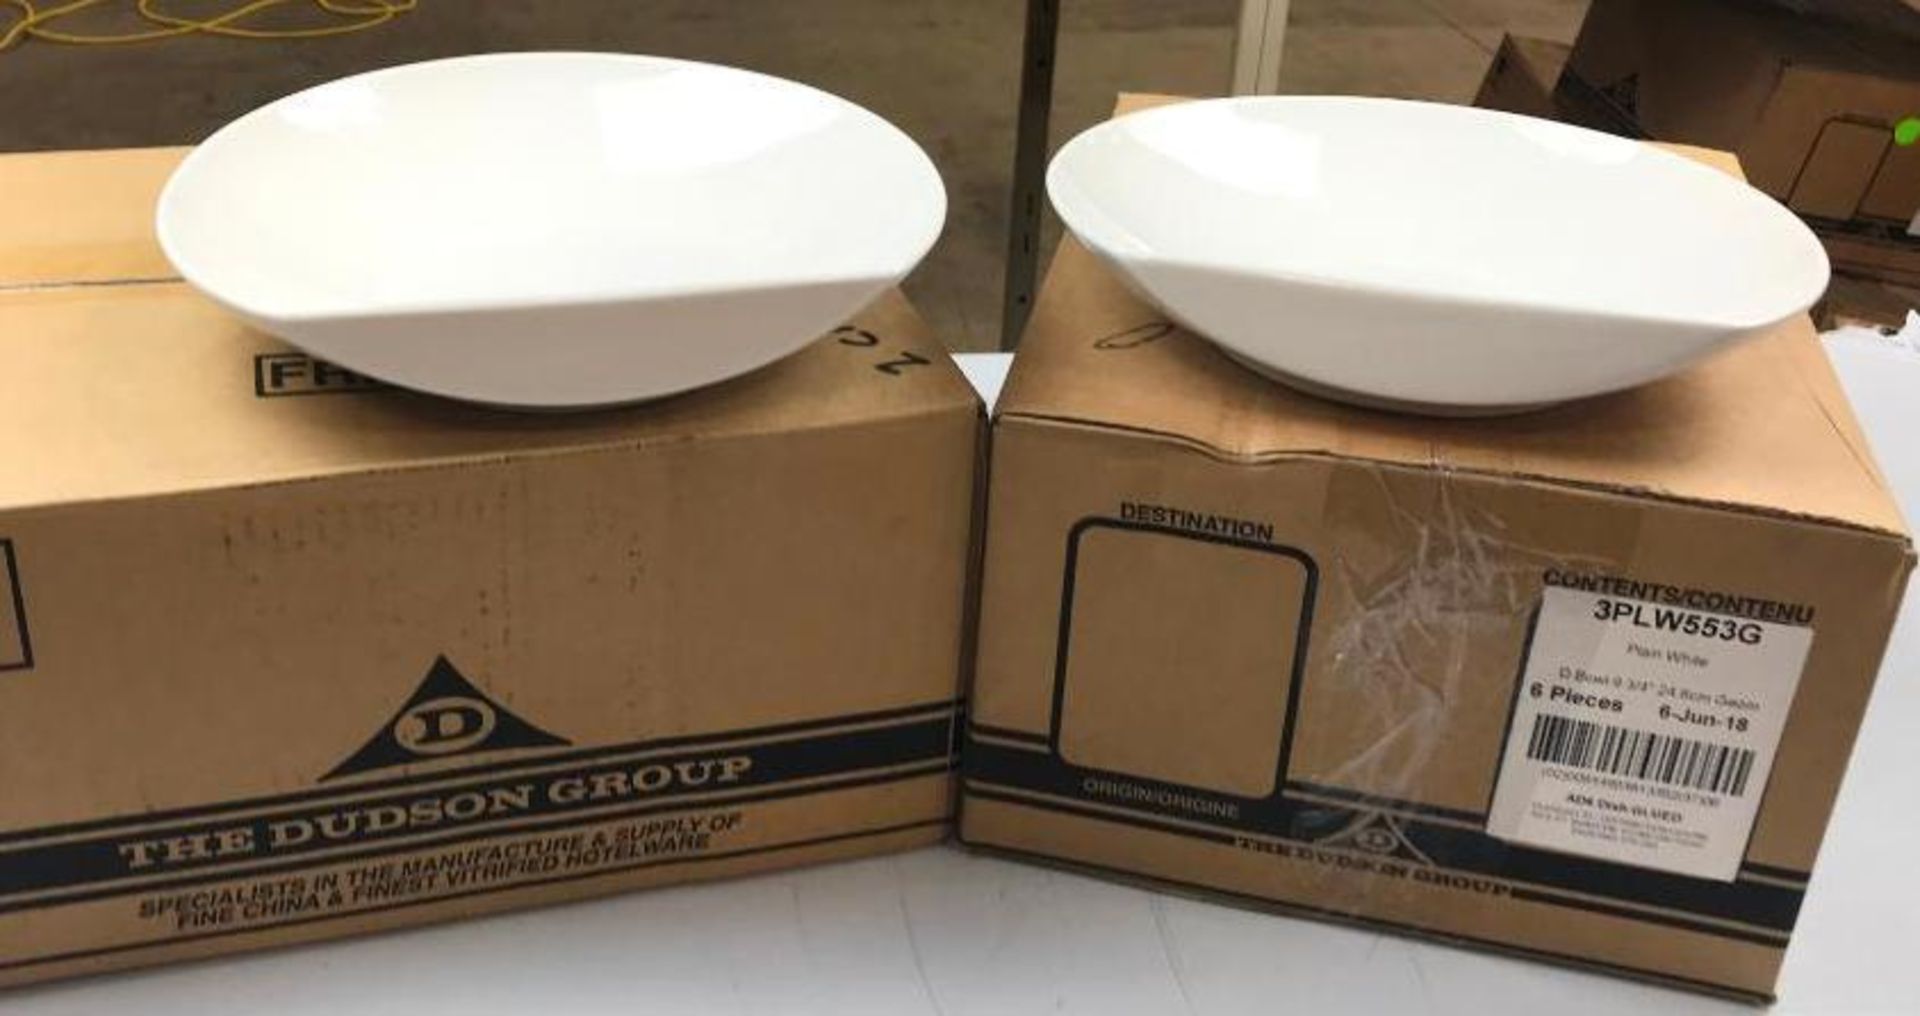 2 CASES OF DUDSON GEOMETRIX D BOWL 9.75" - 6/CASE, MADE IN ENGLAND